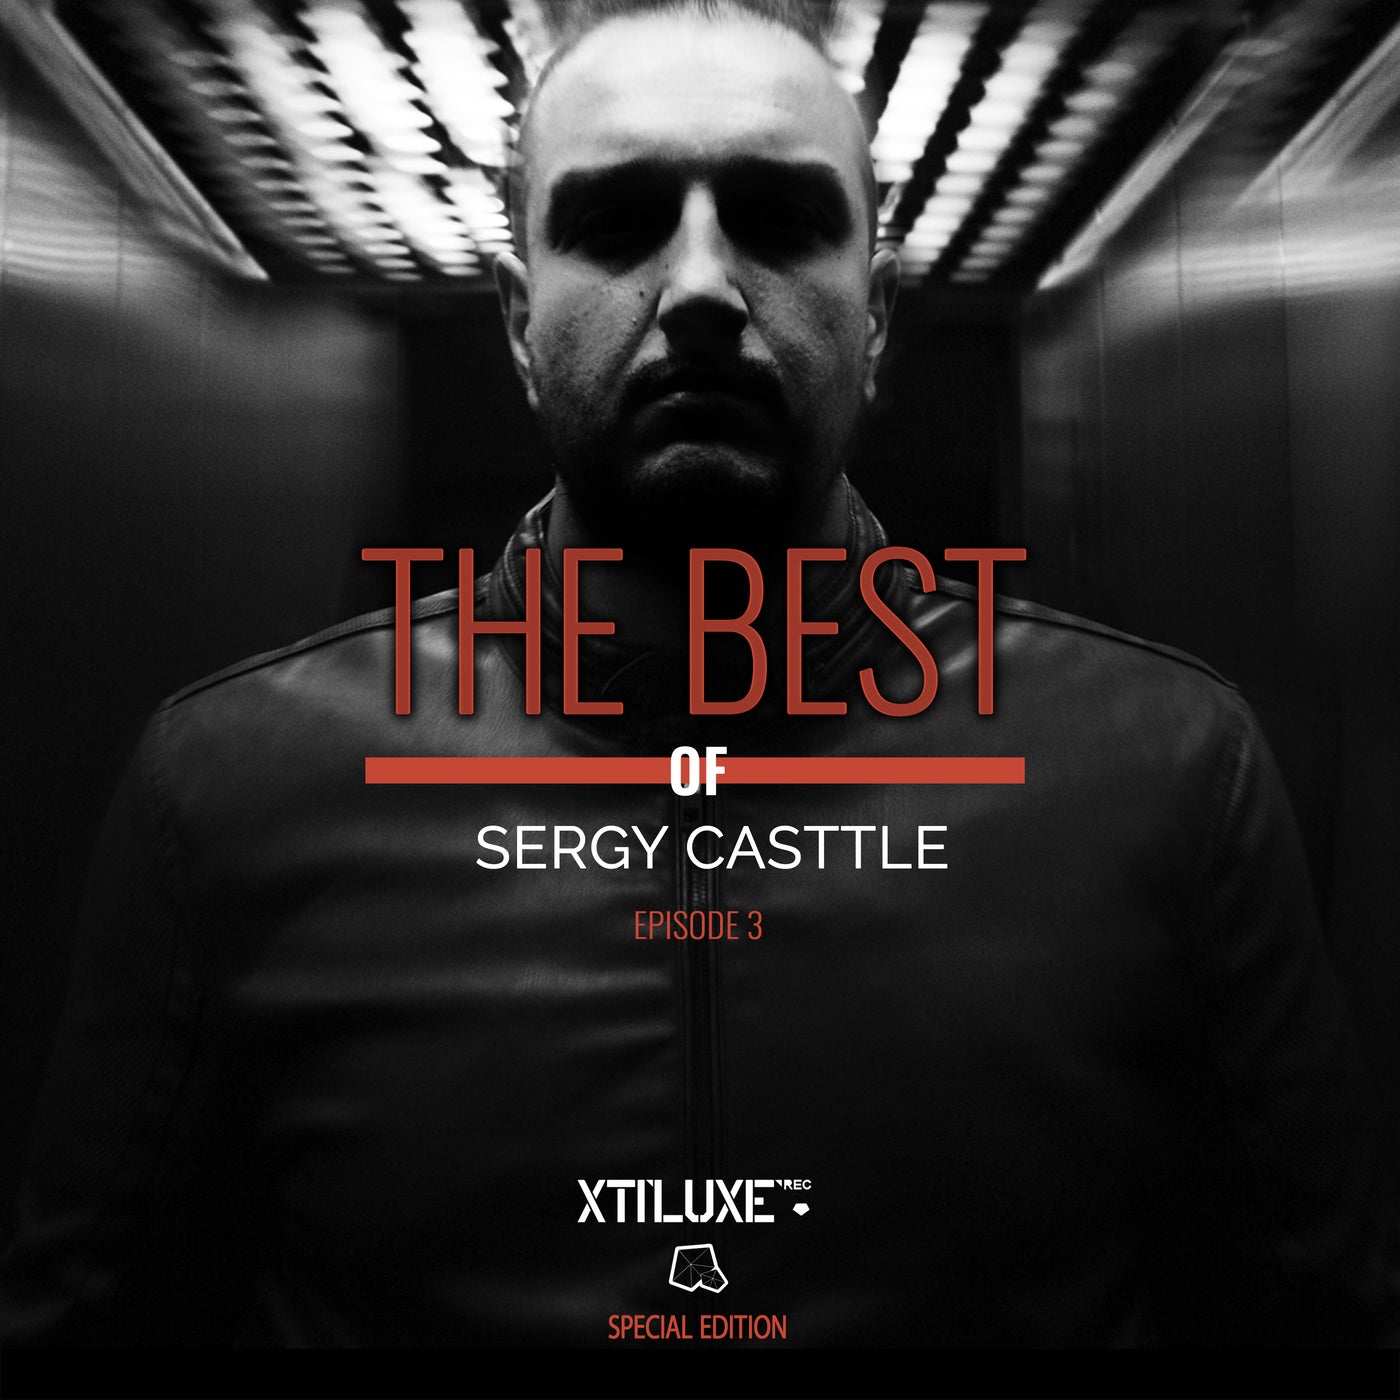 The Best of Sergy Casttle. Episode 3